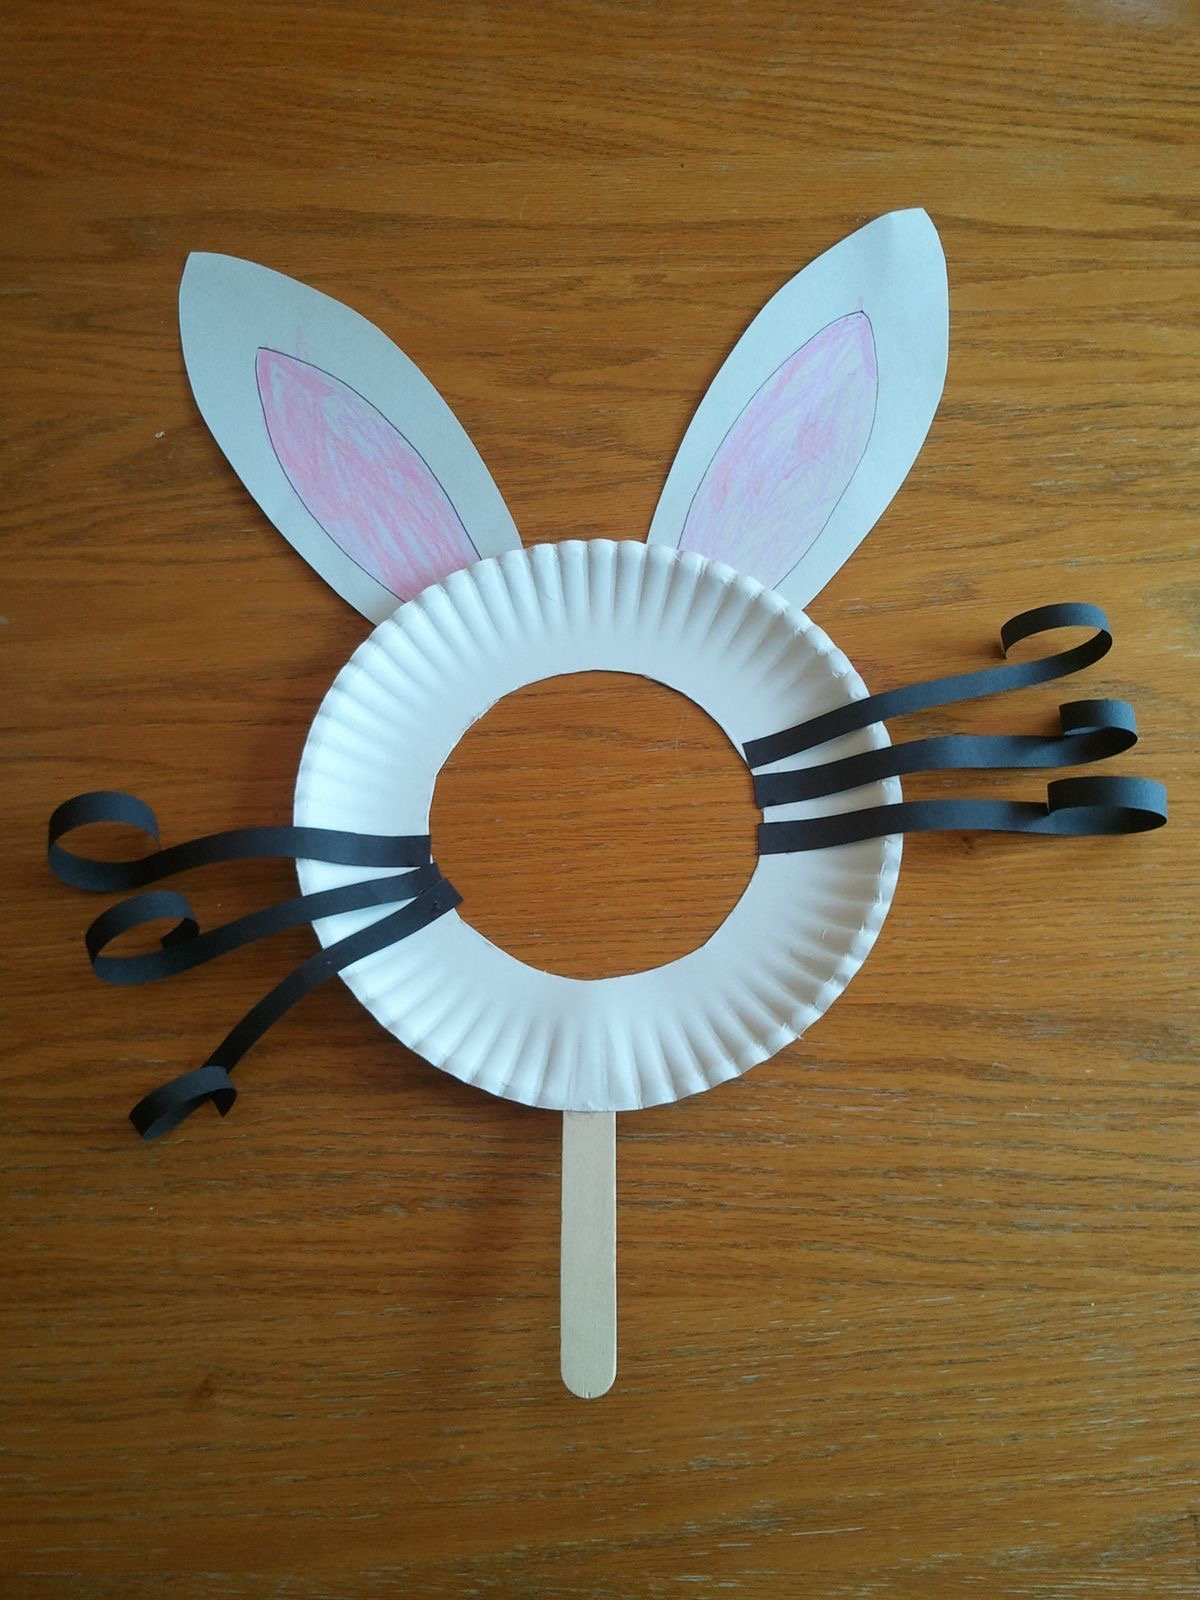 Arts And Crafts For Easter
 15 Cutest Ever Easter Crafts For Kids